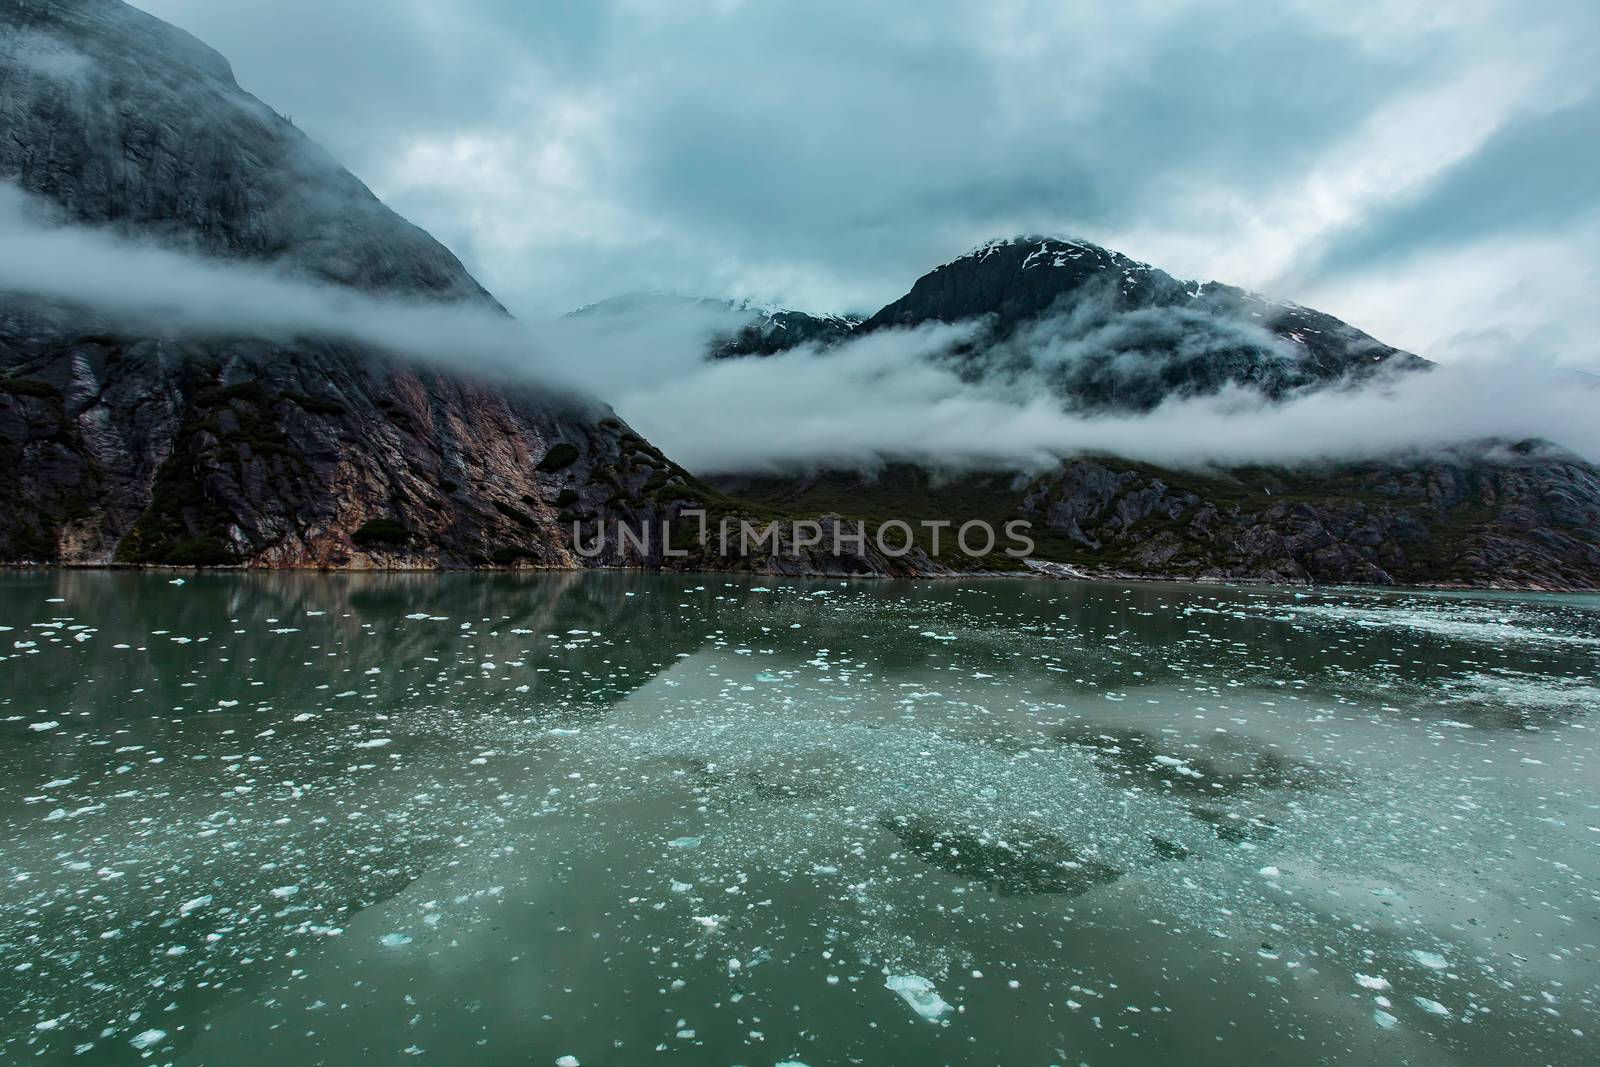 Icy water of the Endicott Arm Fjord in Alaska